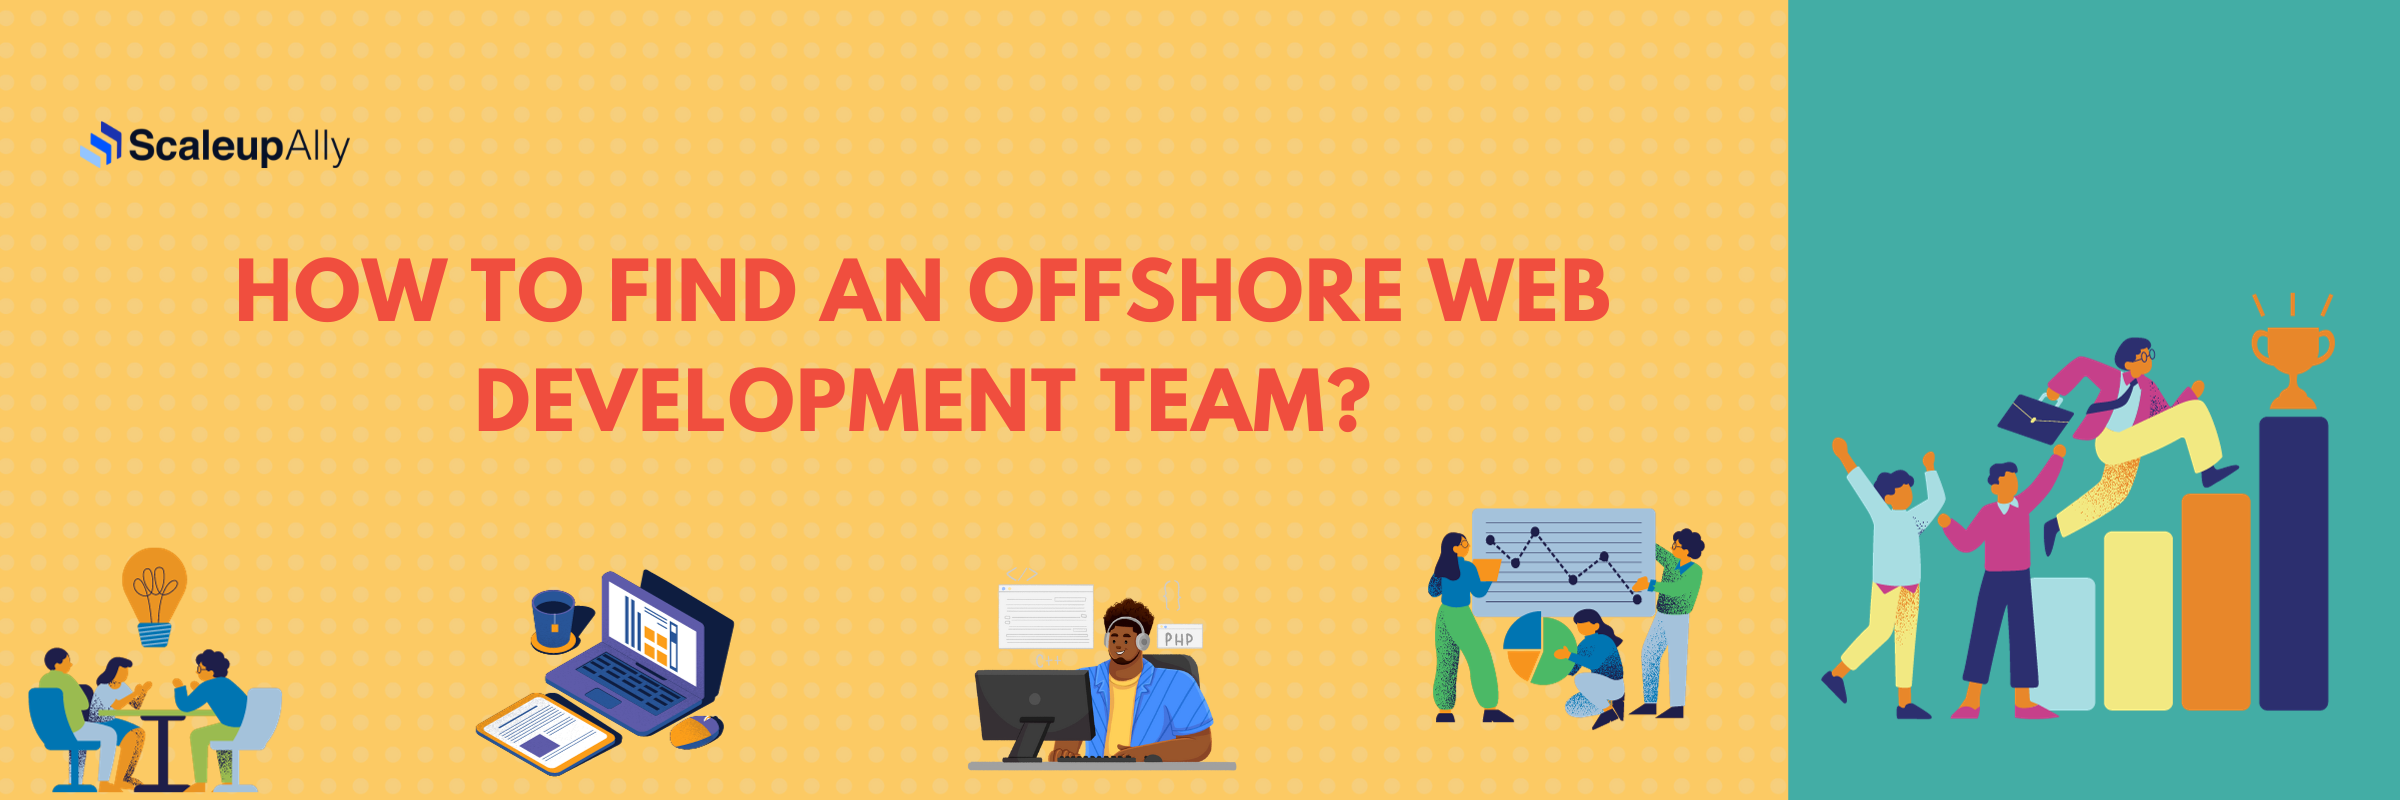 How to find an Offshore Web Development Team?